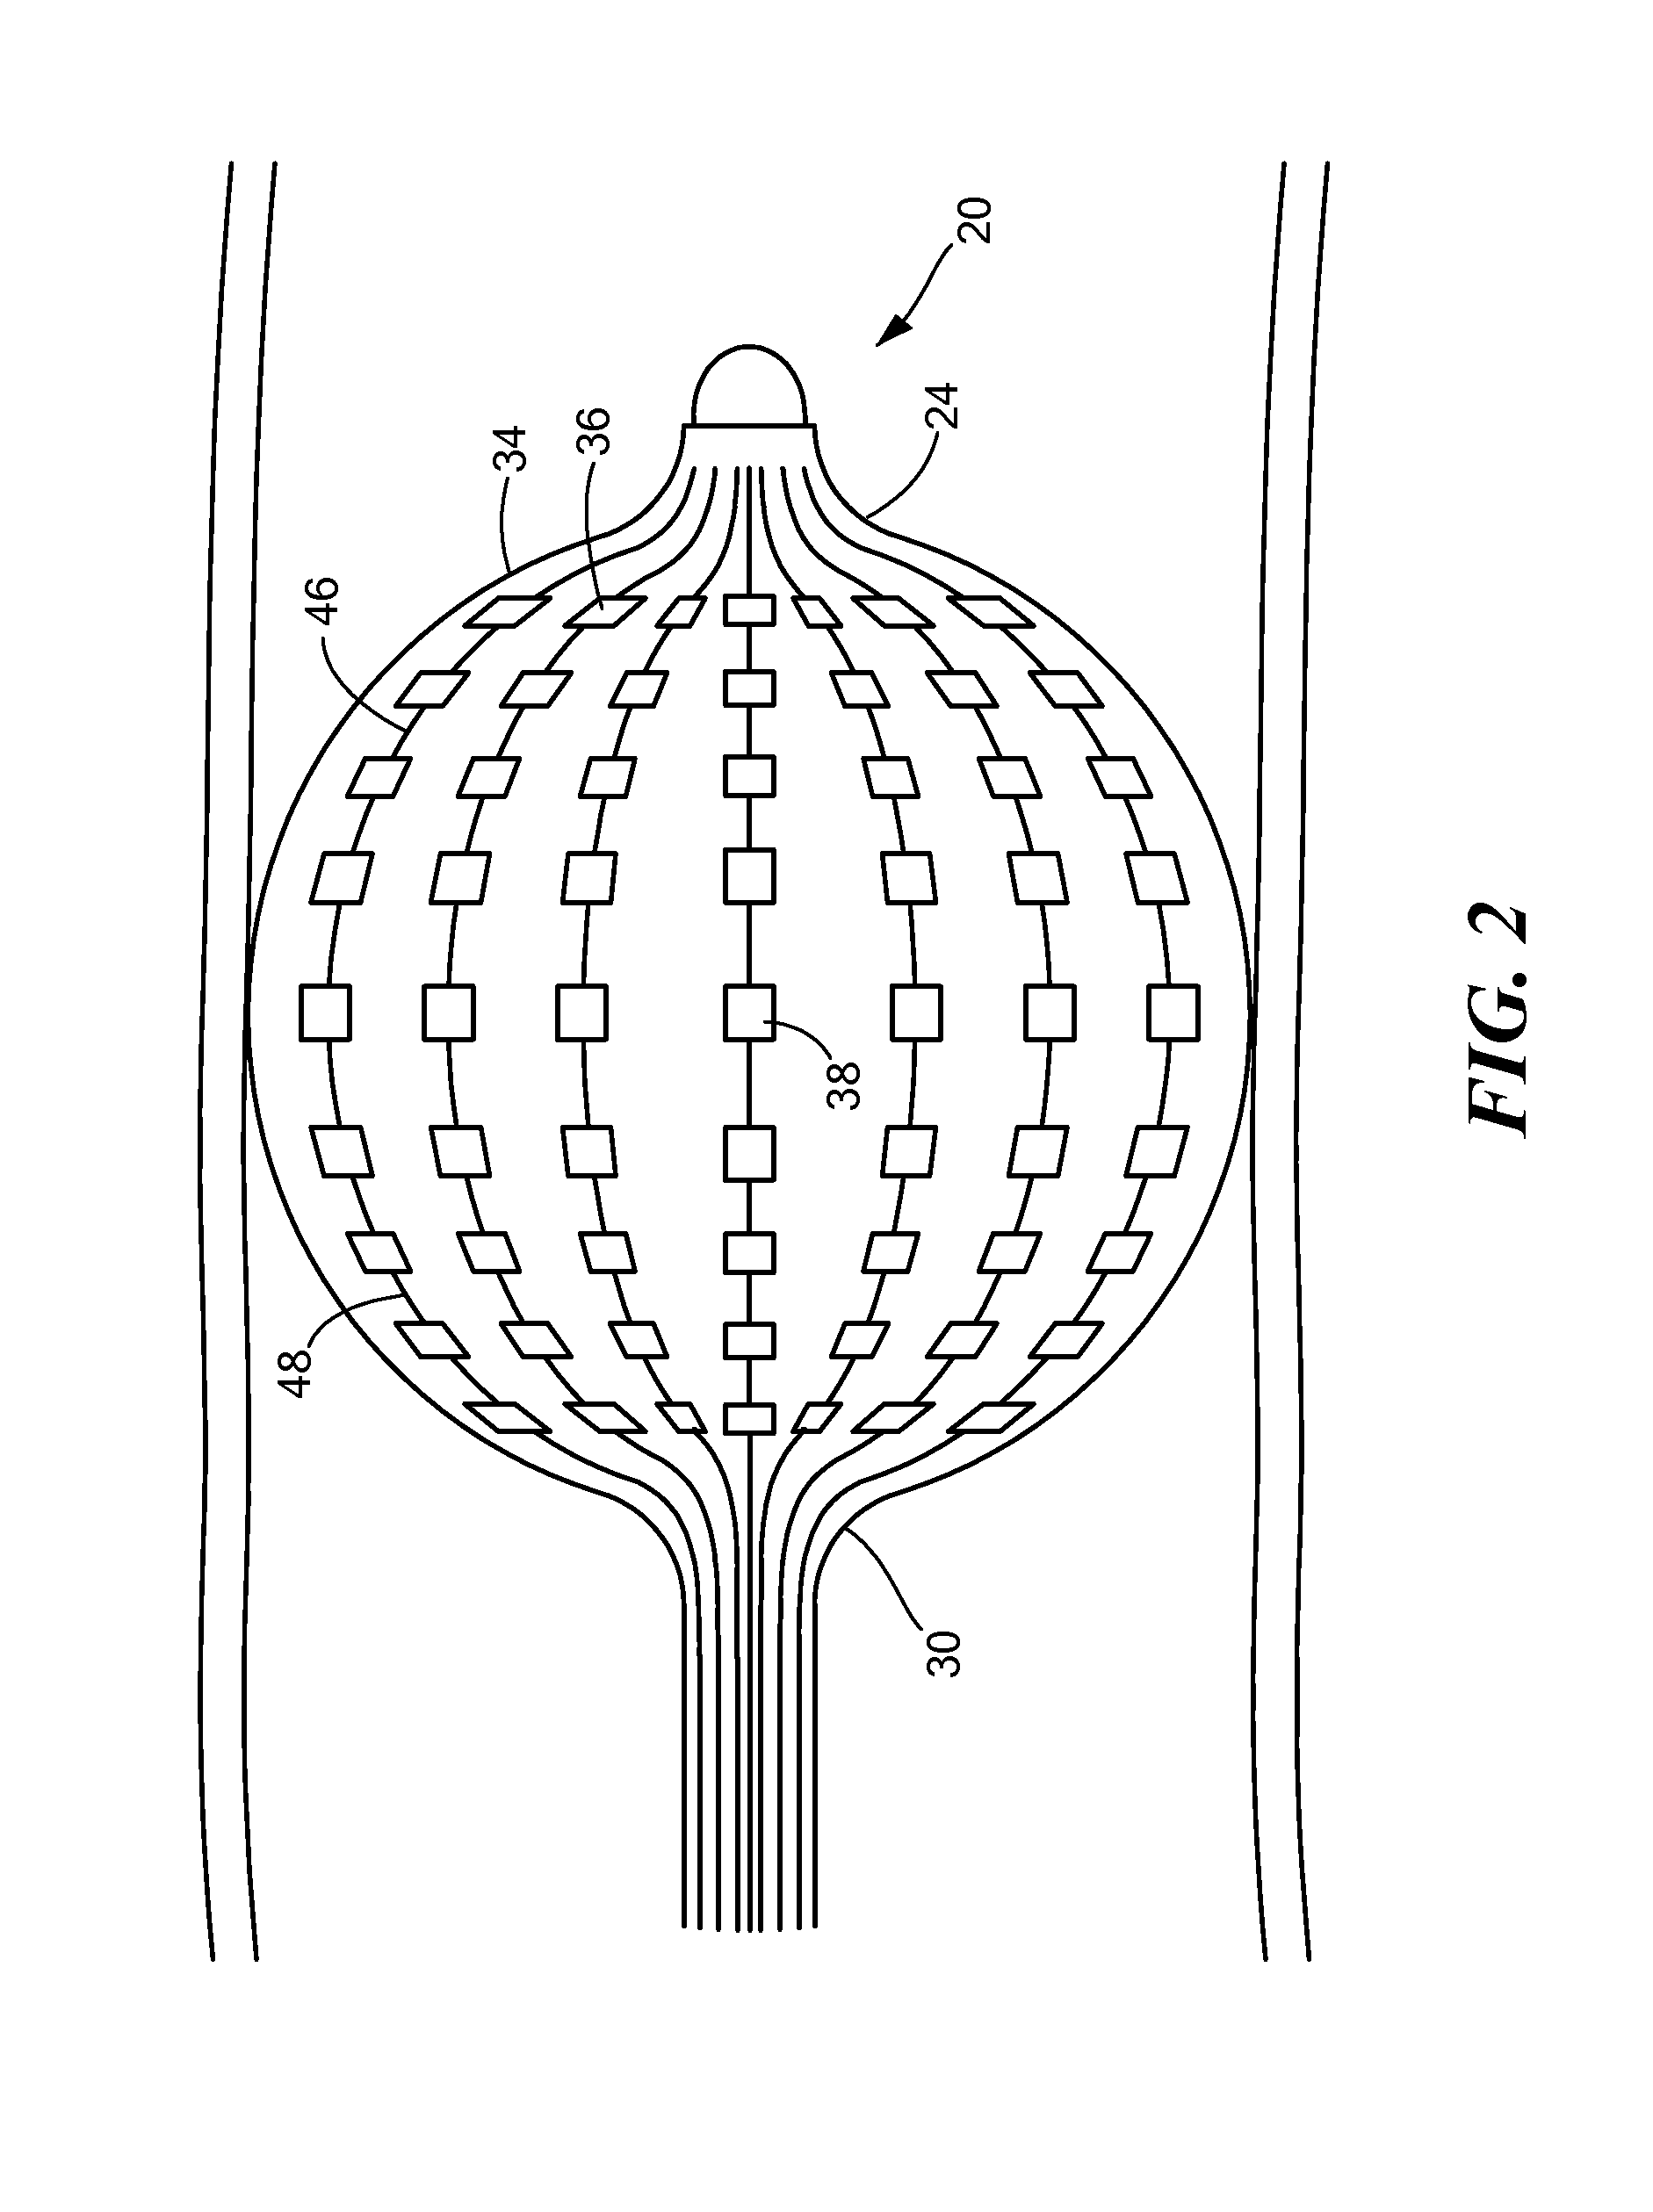 Contact specific RF therapy balloon